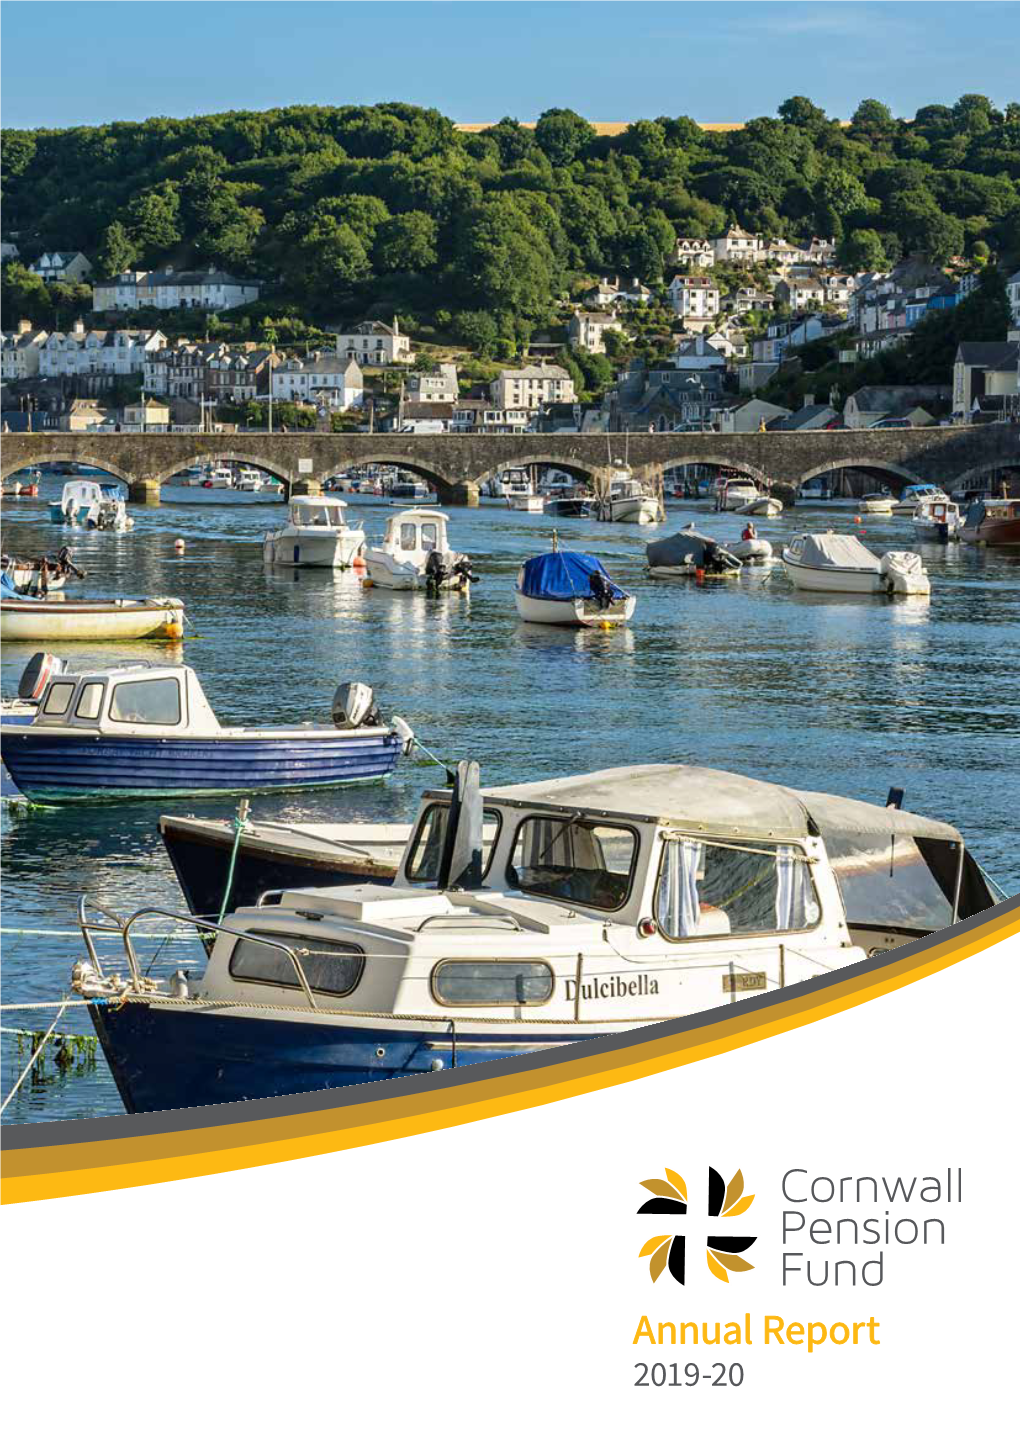 Annual Report 2019-20 Contacts Russell Ashman Head of Pensions, Treasury and Technical T: 01872 322209 E: Russell.Ashman@Cornwall.Gov.Uk